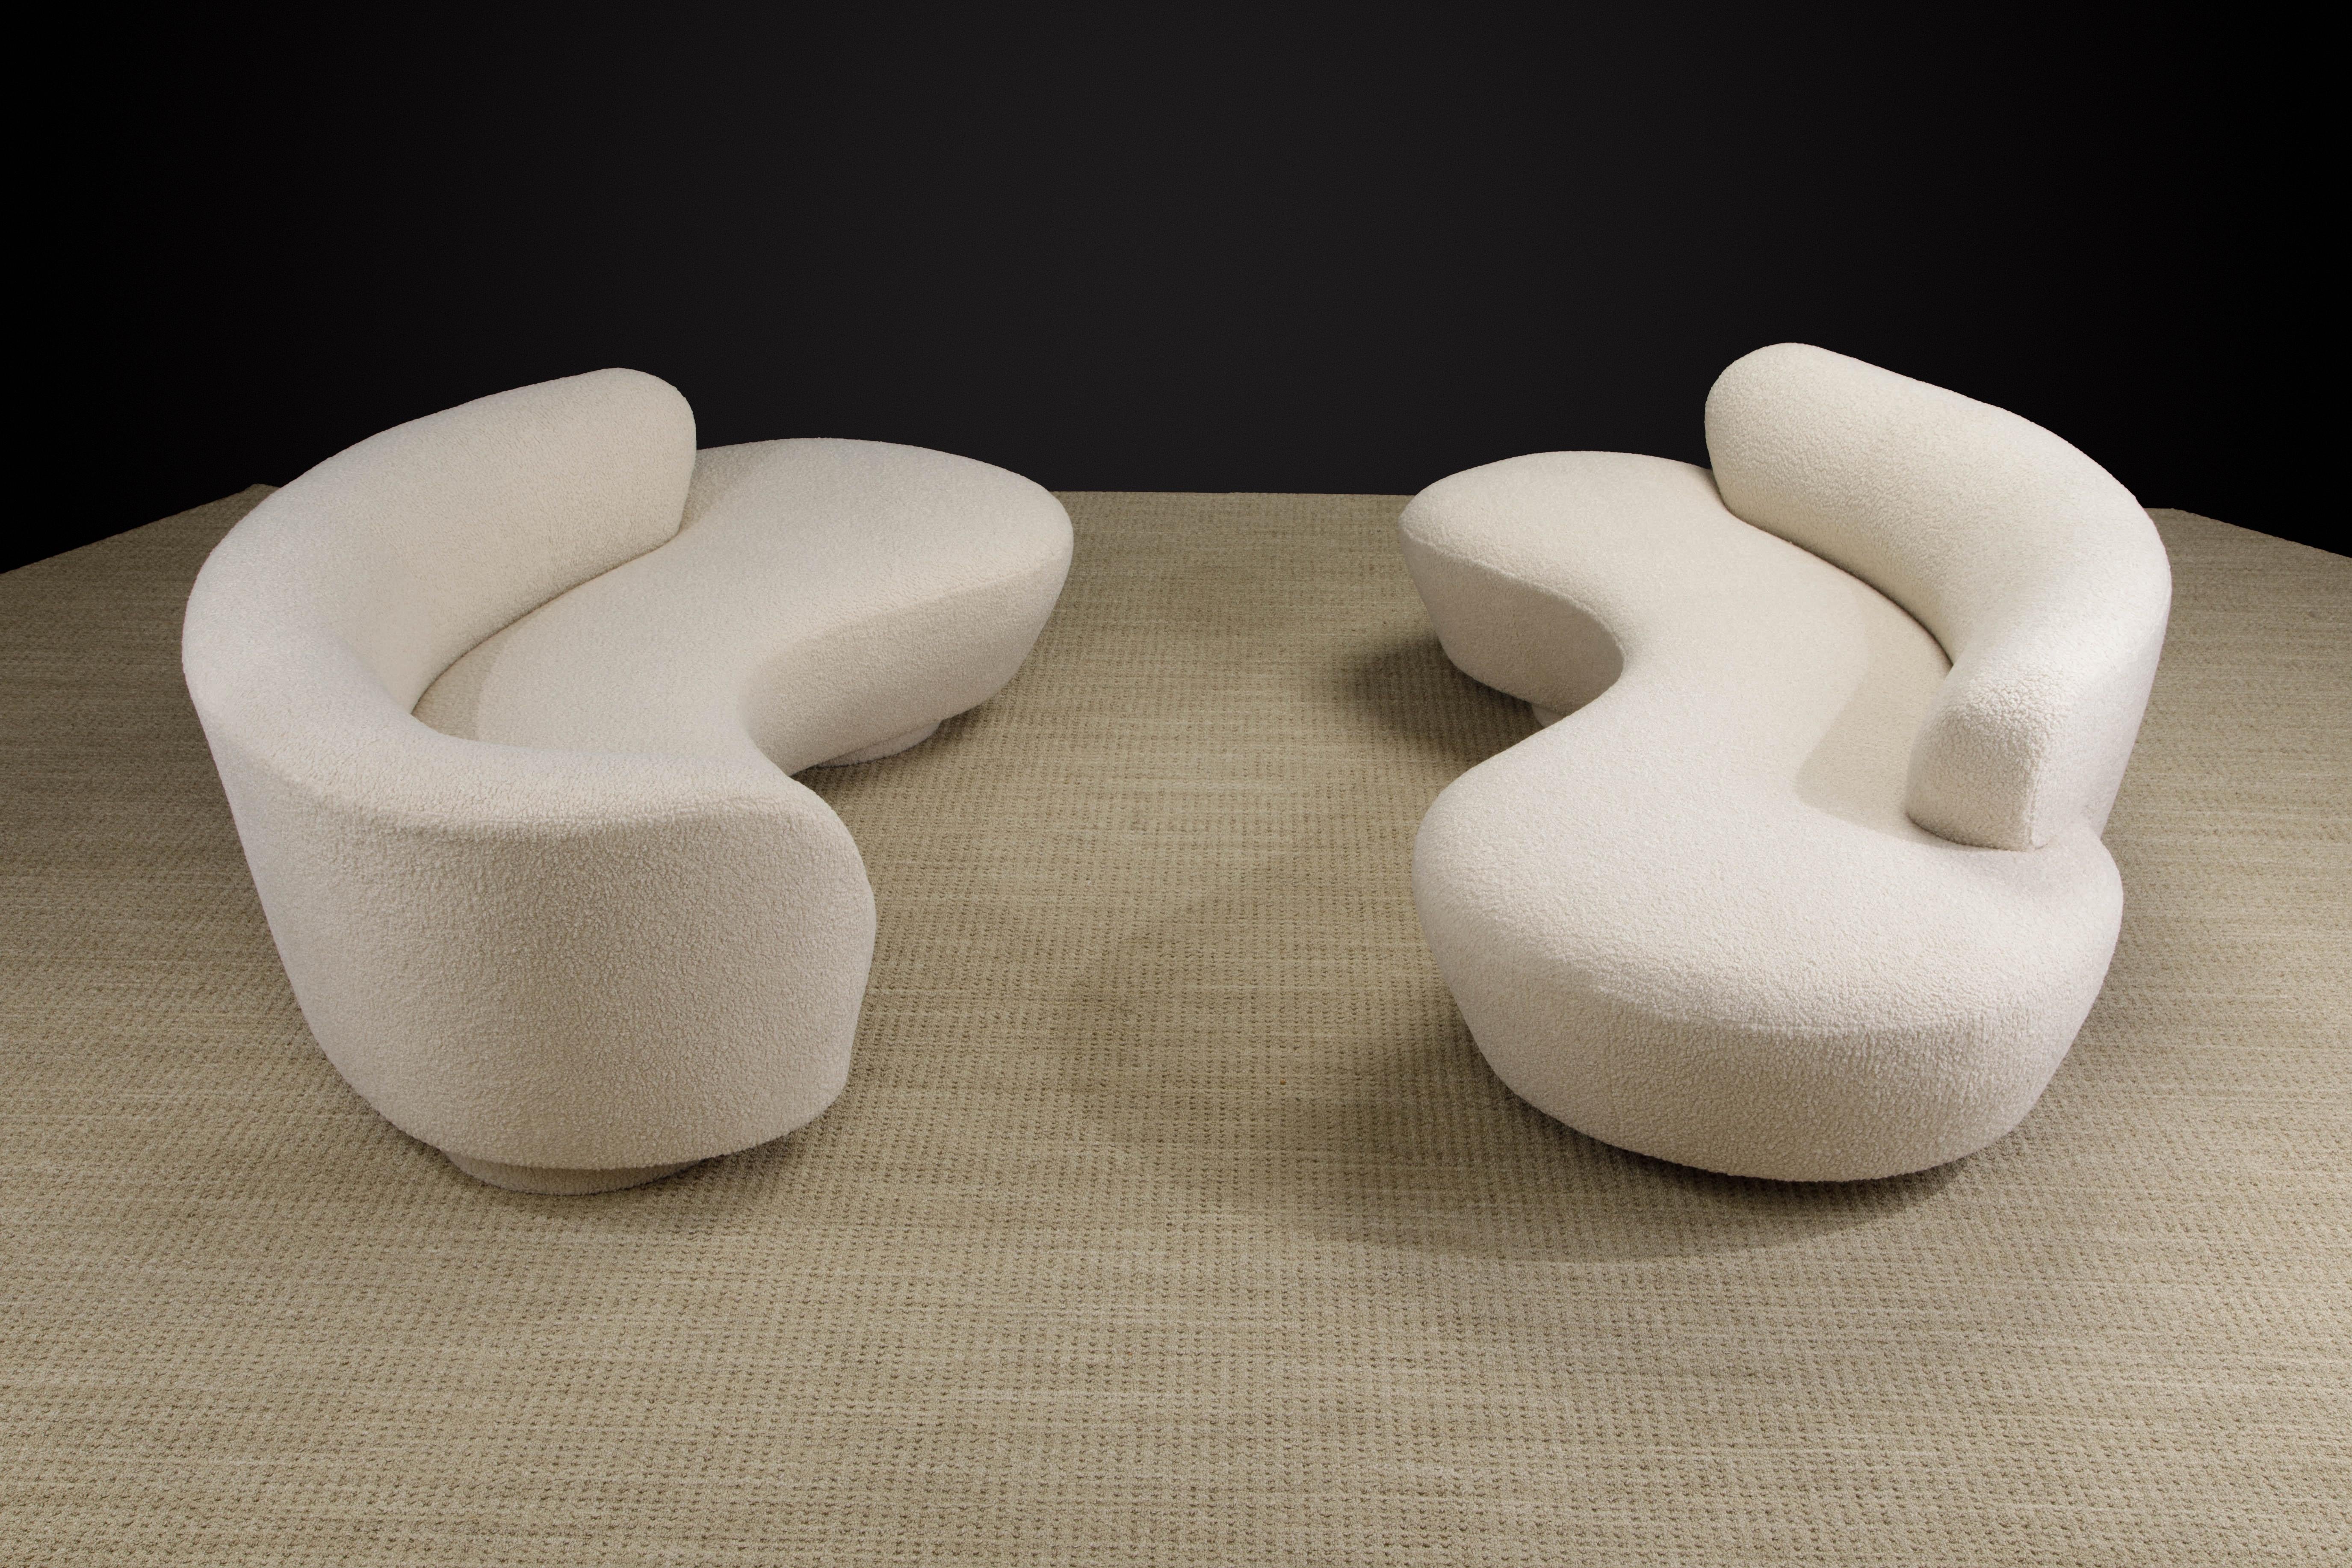 This spectacular pair of Vladimir Kagan 'Cloud' sofas were produced by Directional in circa 1980 and were newly reupholstered in a gorgeous nubby bouclé fabric, both sofas signed underneath with Directional labels and have lucite center support